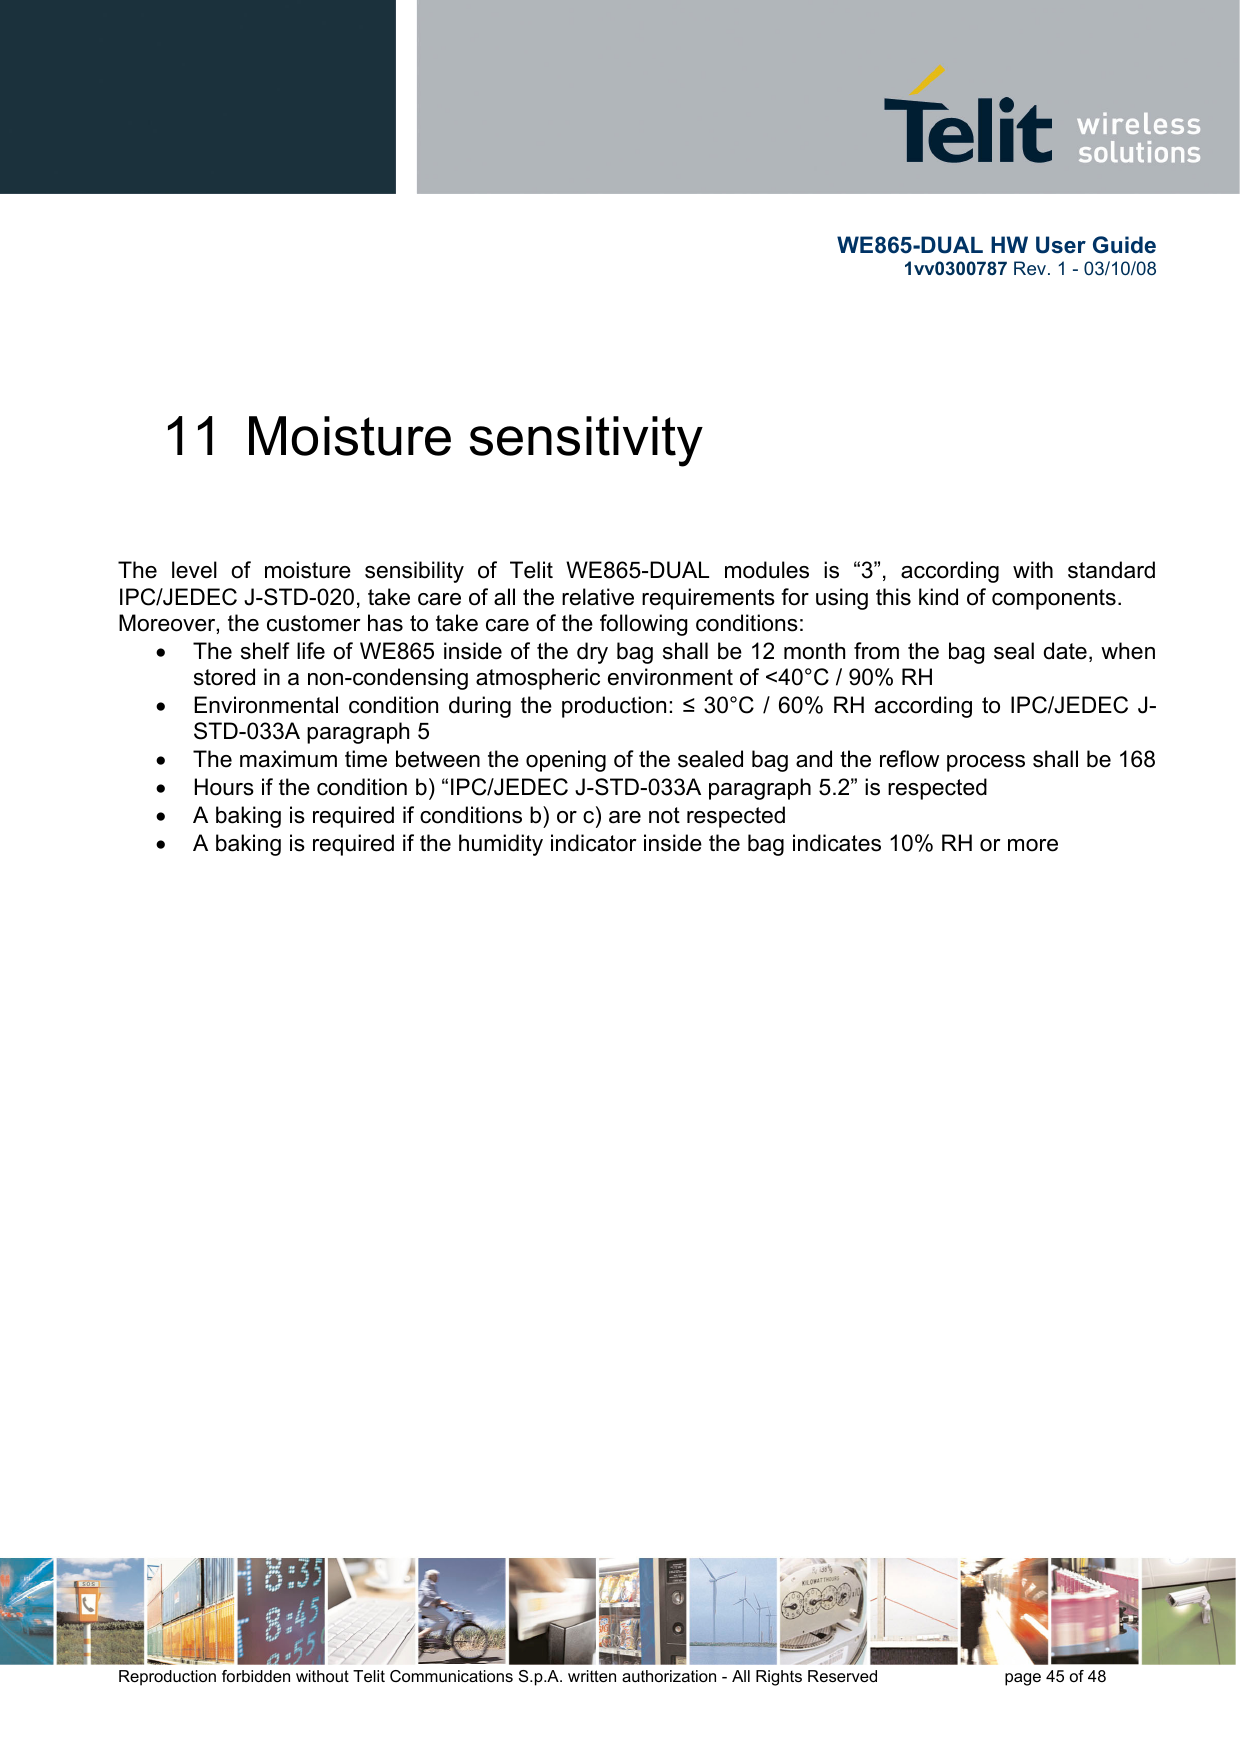       WE865-DUAL HW User Guide 1vv0300787 Rev. 1 - 03/10/08      Reproduction forbidden without Telit Communications S.p.A. written authorization - All Rights Reserved    page 45 of 48  11  Moisture sensitivity    The level of moisture sensibility of Telit WE865-DUAL modules is “3”, according with standard IPC/JEDEC J-STD-020, take care of all the relative requirements for using this kind of components. Moreover, the customer has to take care of the following conditions: •  The shelf life of WE865 inside of the dry bag shall be 12 month from the bag seal date, when stored in a non-condensing atmospheric environment of &lt;40°C / 90% RH •  Environmental condition during the production: ≤ 30°C / 60% RH according to IPC/JEDEC J-STD-033A paragraph 5 •  The maximum time between the opening of the sealed bag and the reflow process shall be 168 •  Hours if the condition b) “IPC/JEDEC J-STD-033A paragraph 5.2” is respected •  A baking is required if conditions b) or c) are not respected •  A baking is required if the humidity indicator inside the bag indicates 10% RH or more 